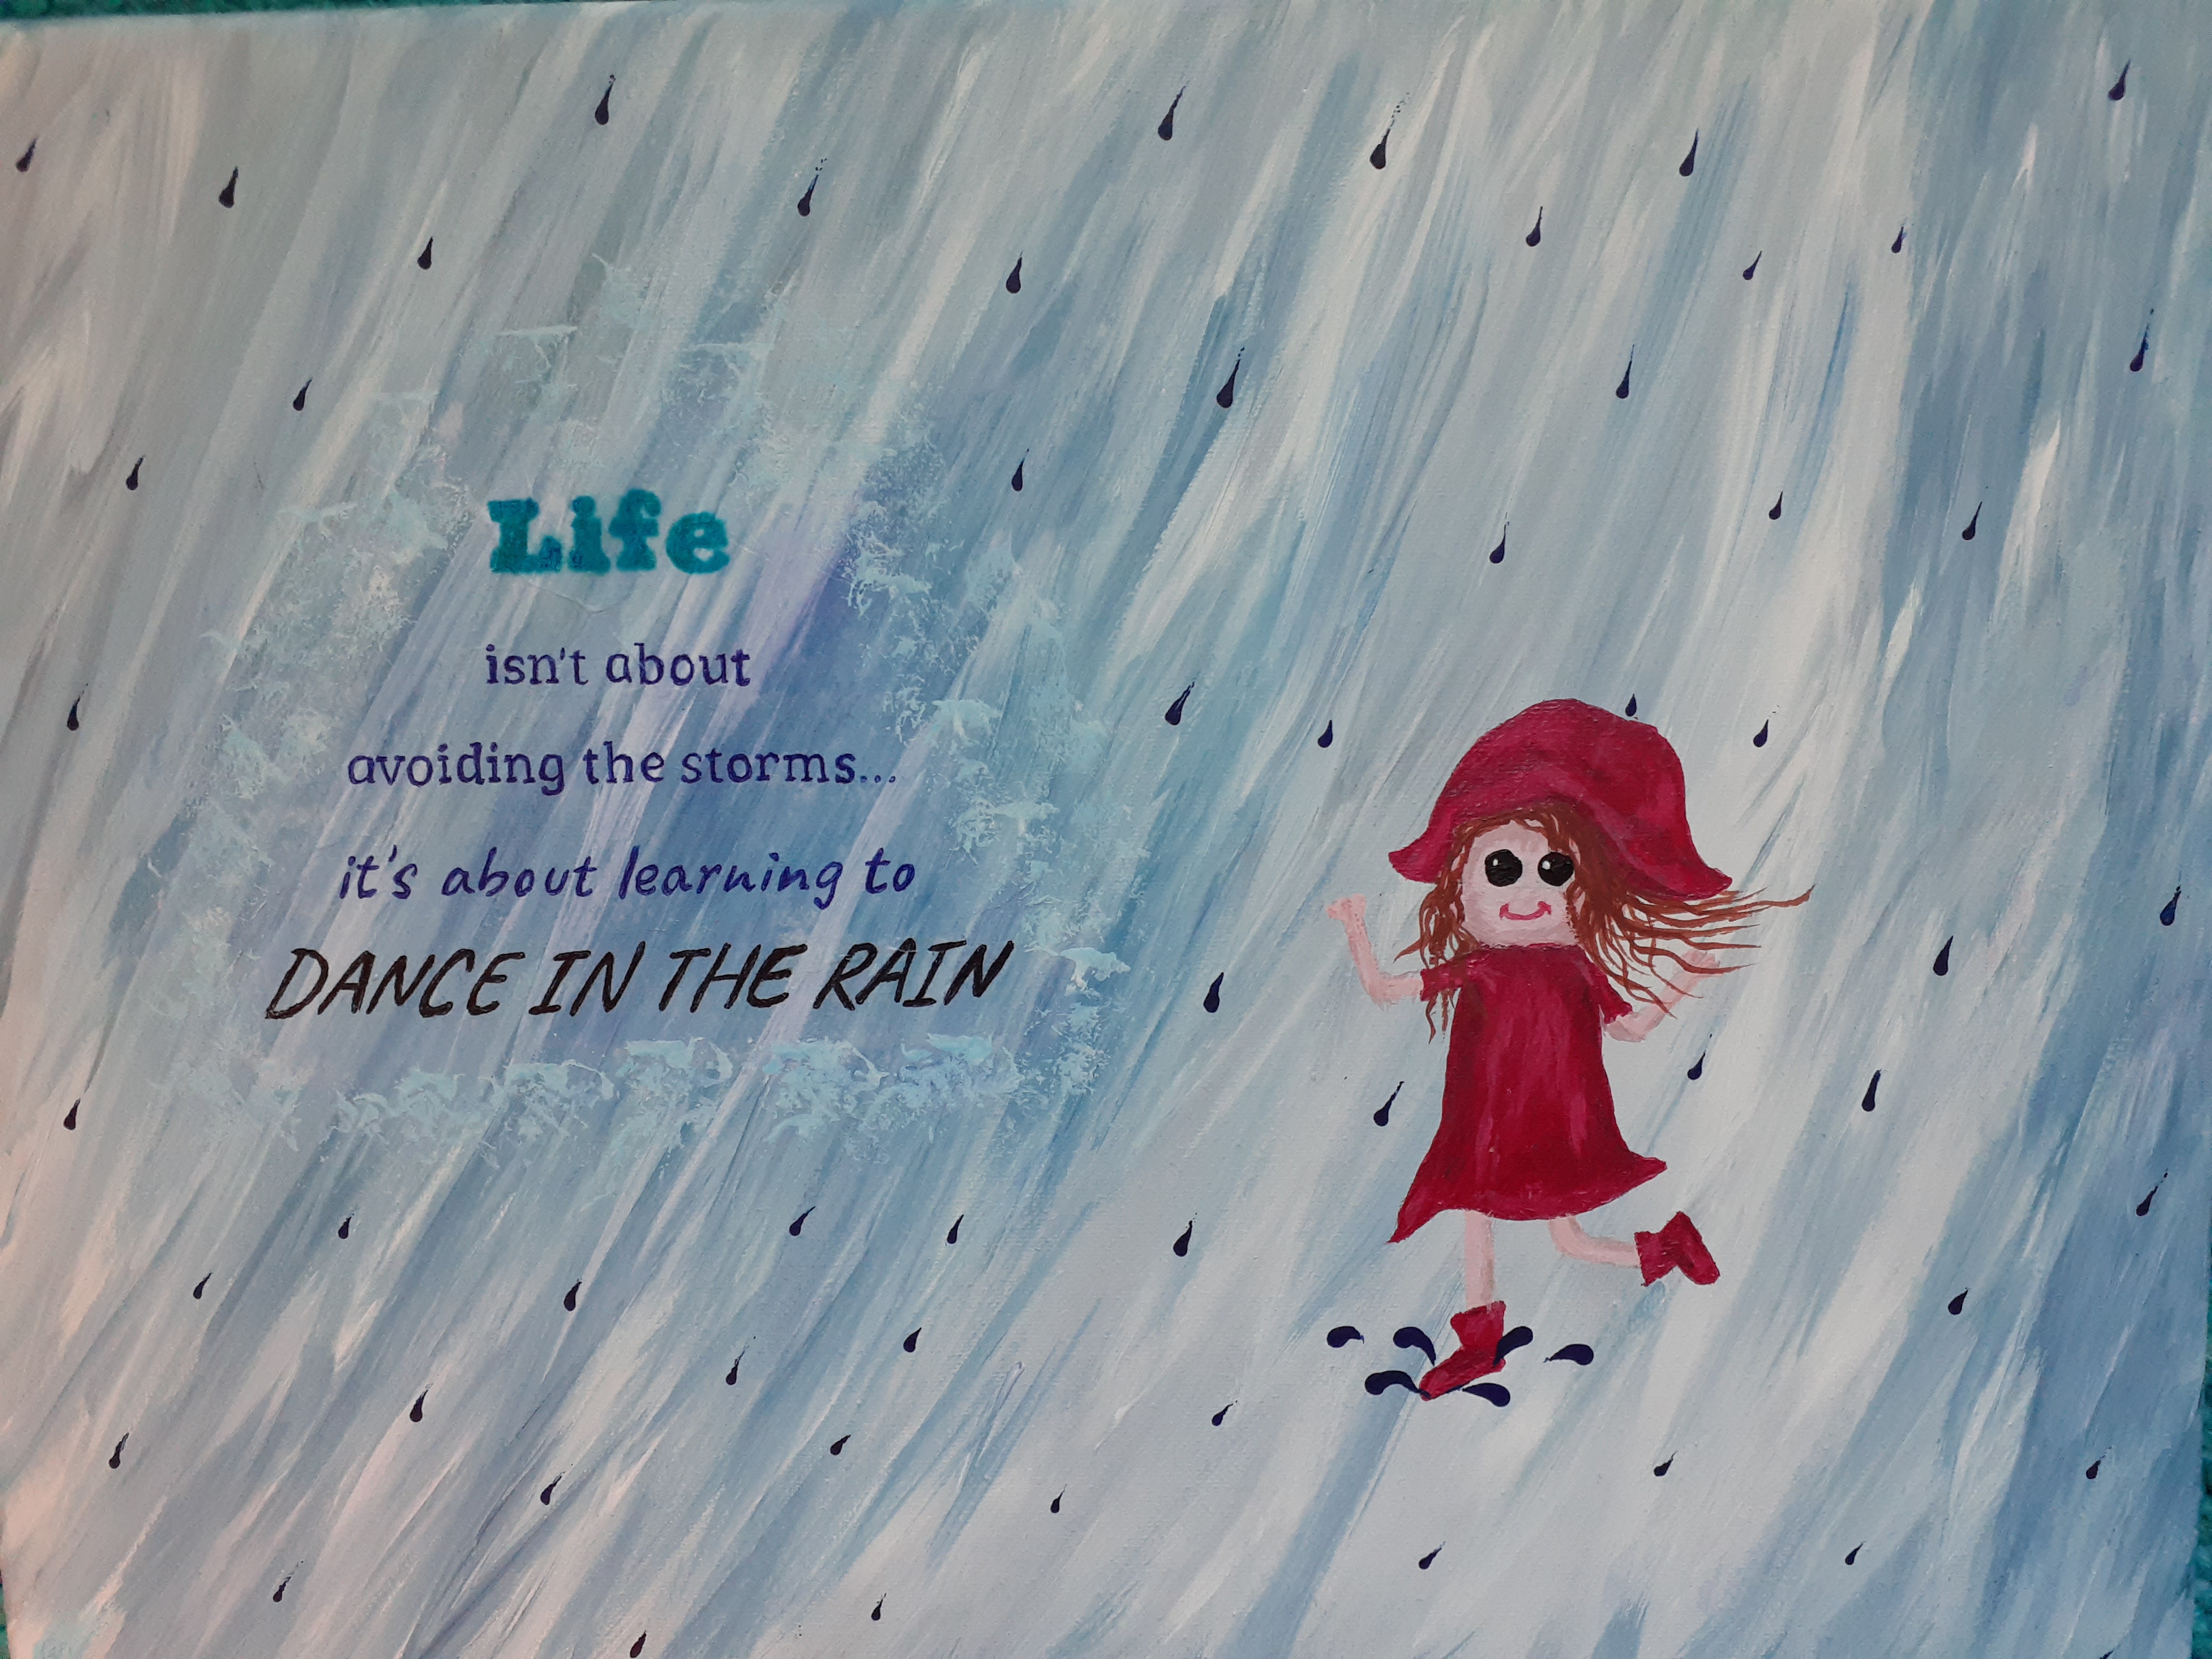 Life isn't about avoiding the storms... it's about learning to dance in the rain